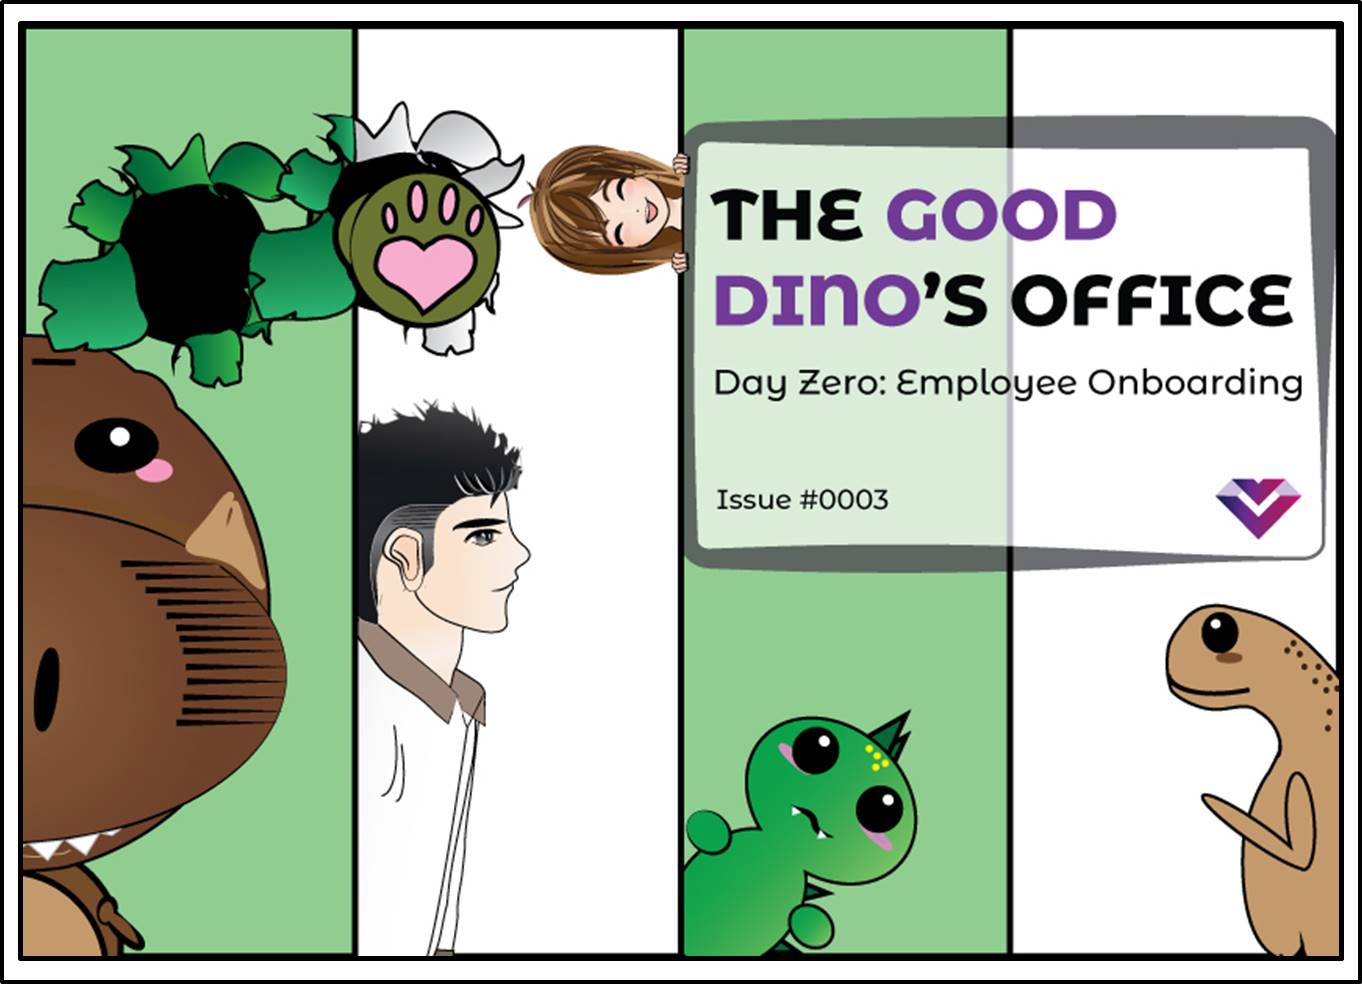 You are currently viewing The Good Dino’s Office: Employee Onboarding Day Zero